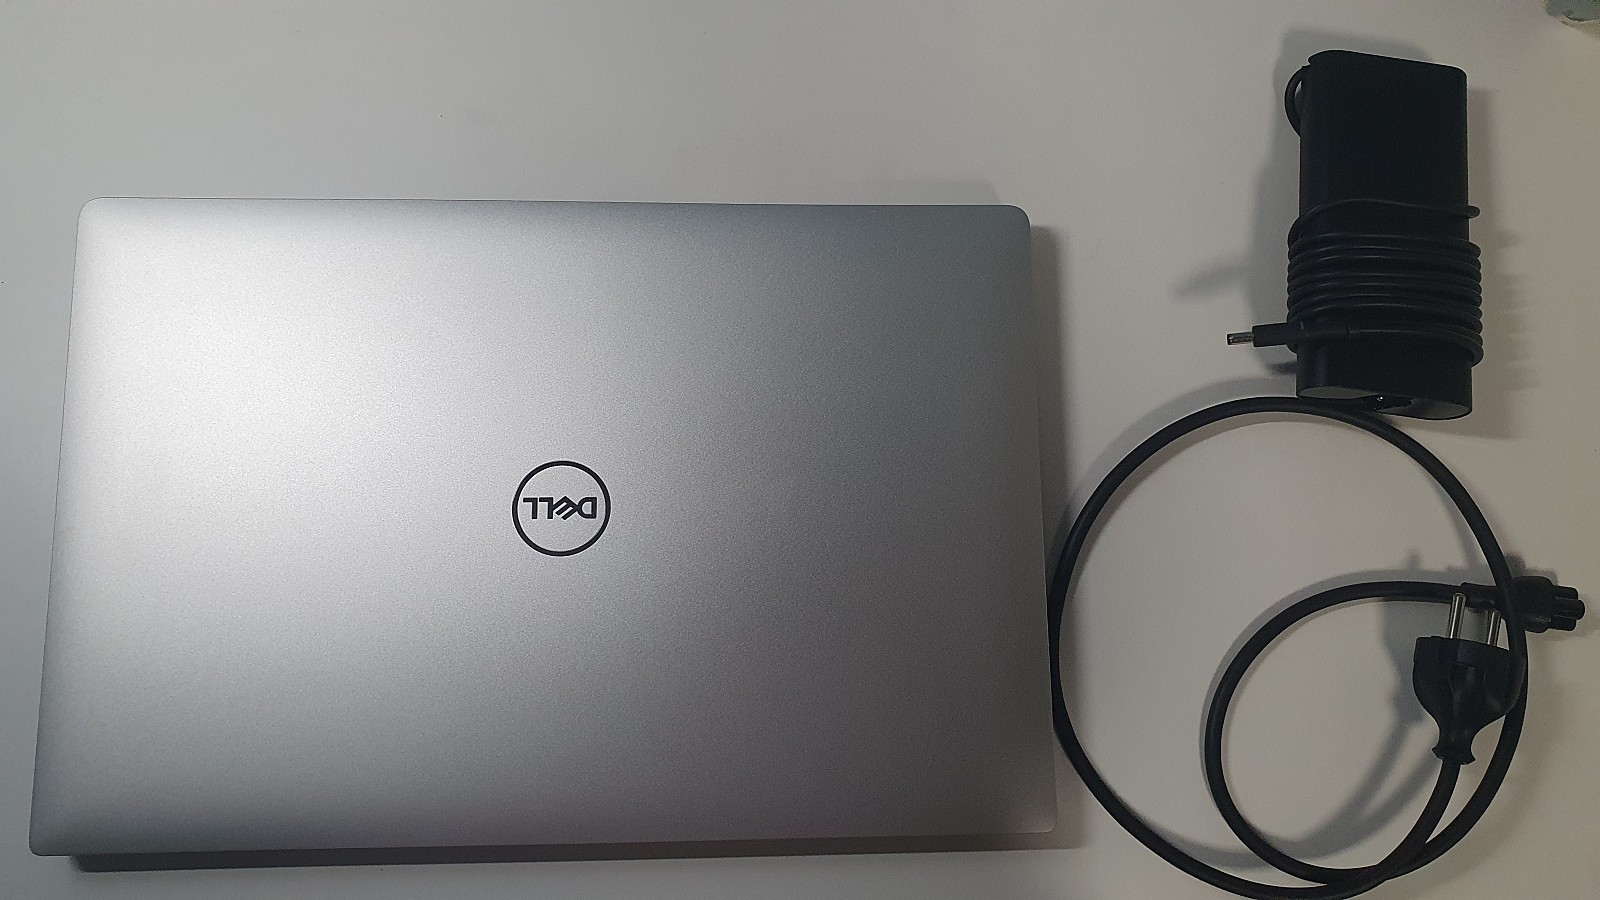 dell xps 15 9570